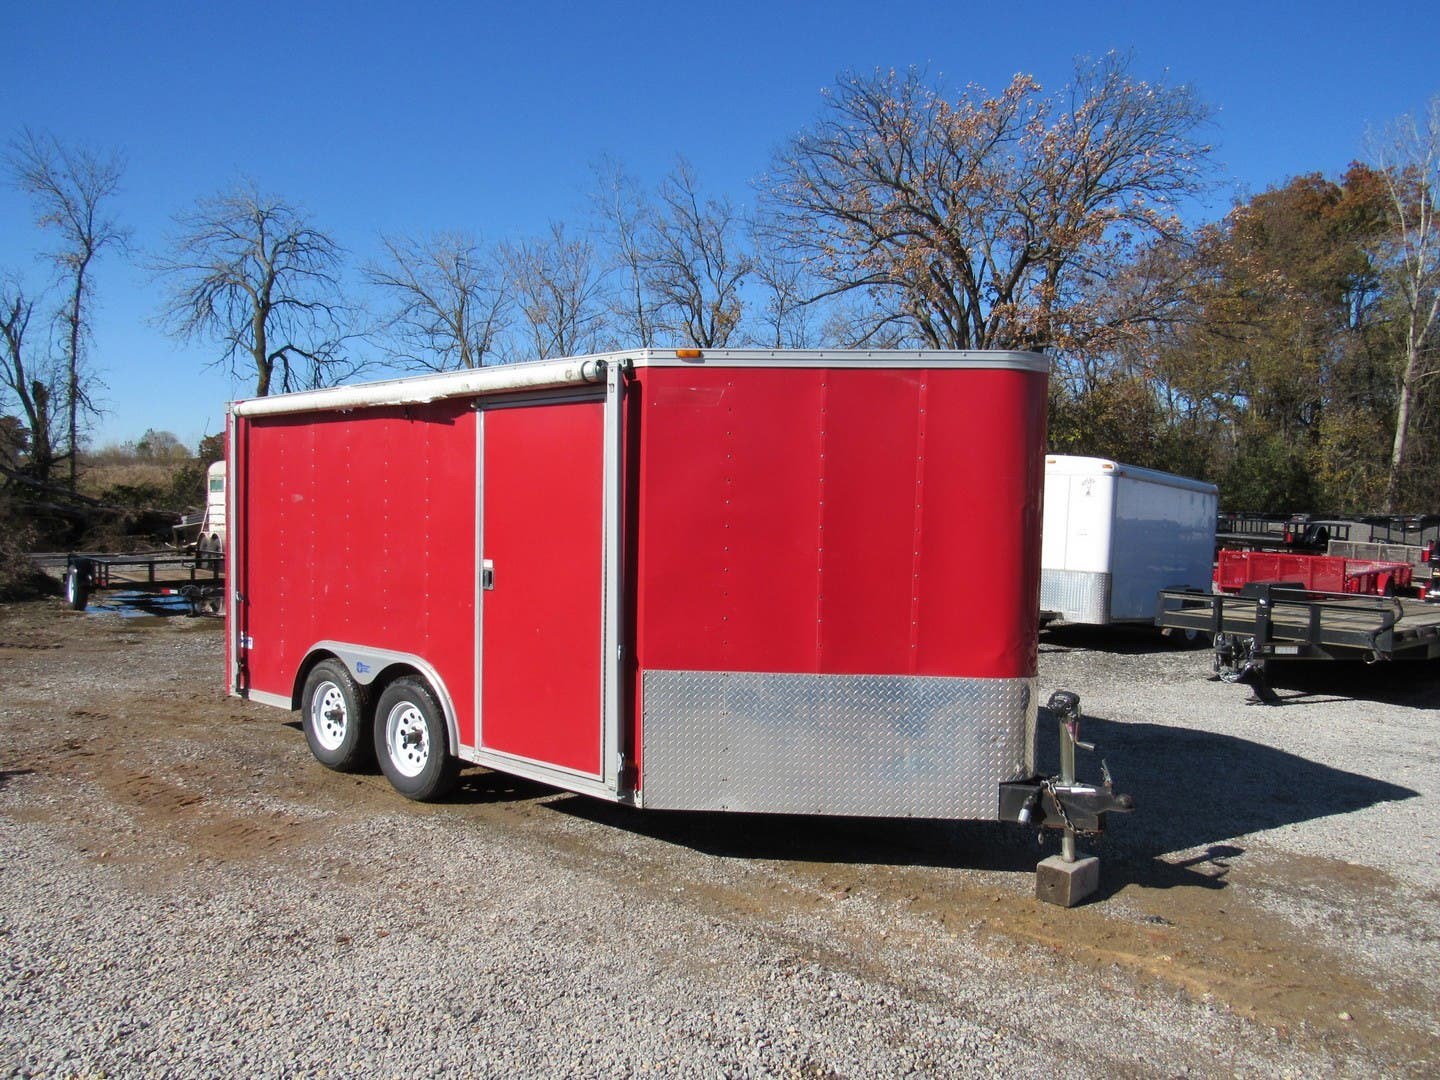 Used Motorcycle trailers for sale - TrailersMarket.com